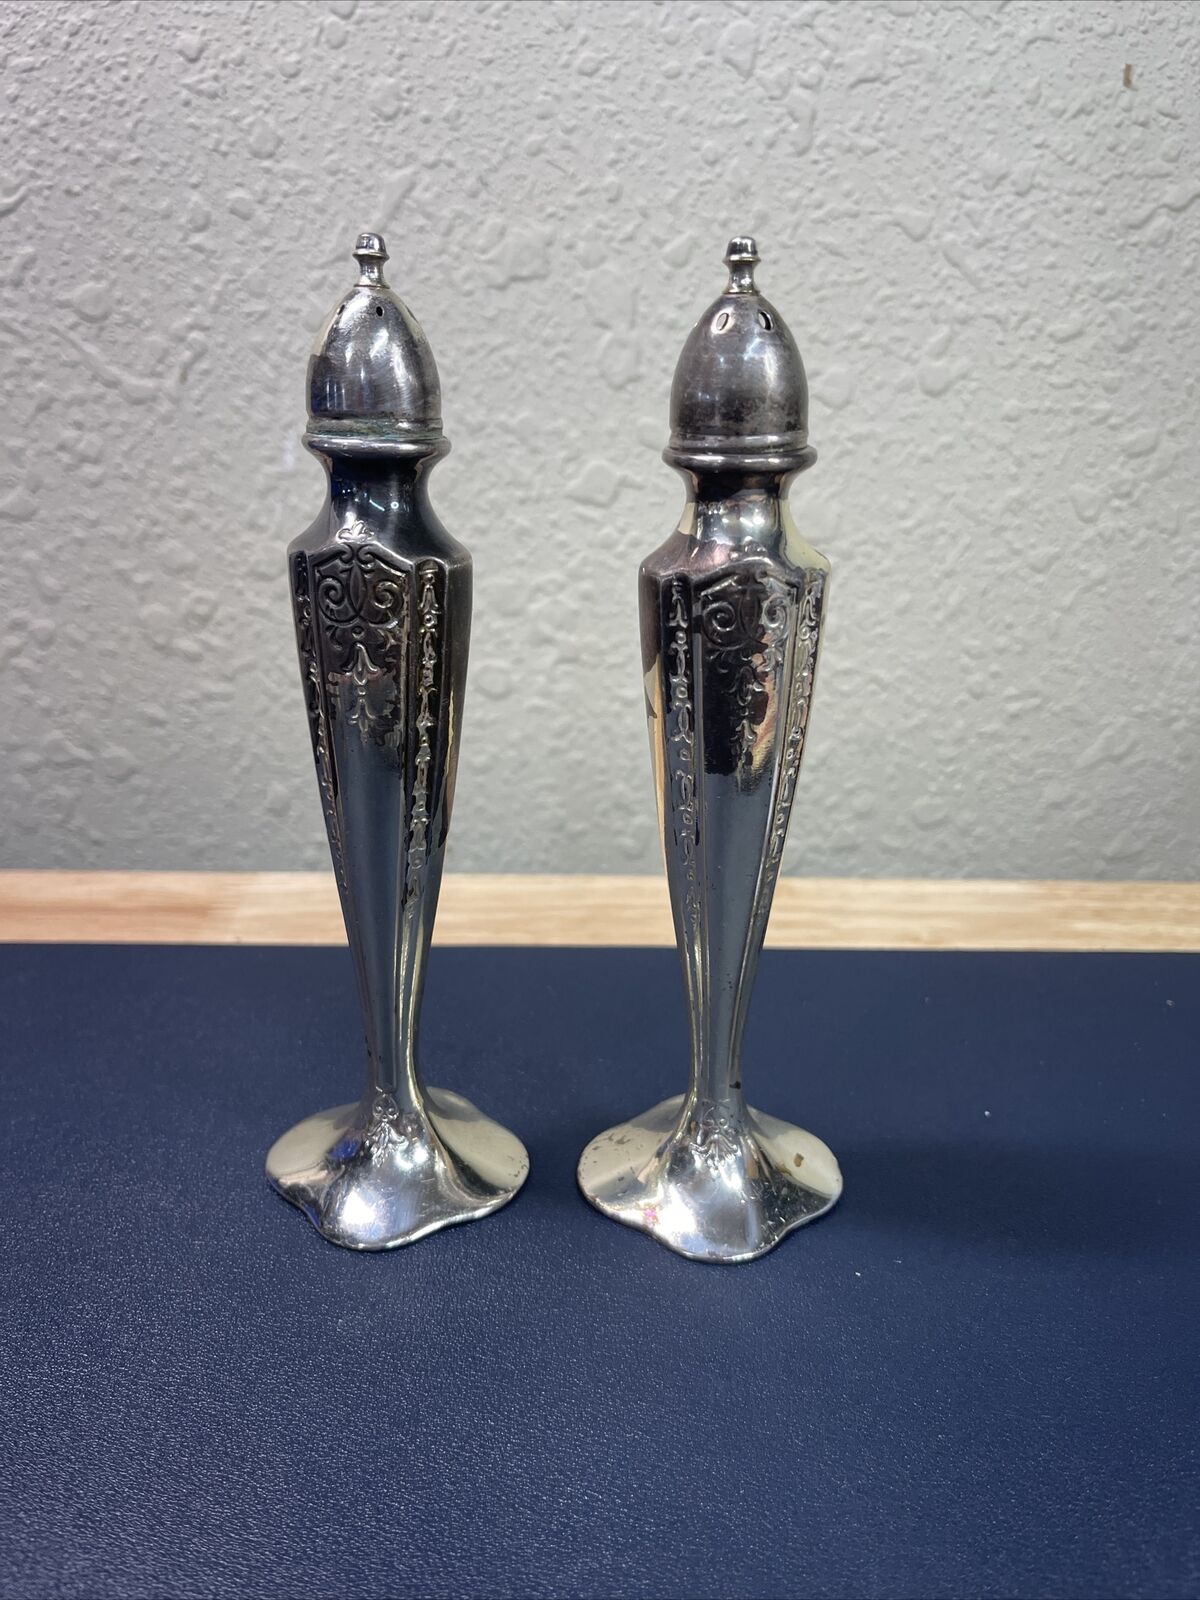 Vintage W.B. MFG Co. 2784 Silver Plated Salt & Pepper Shakers